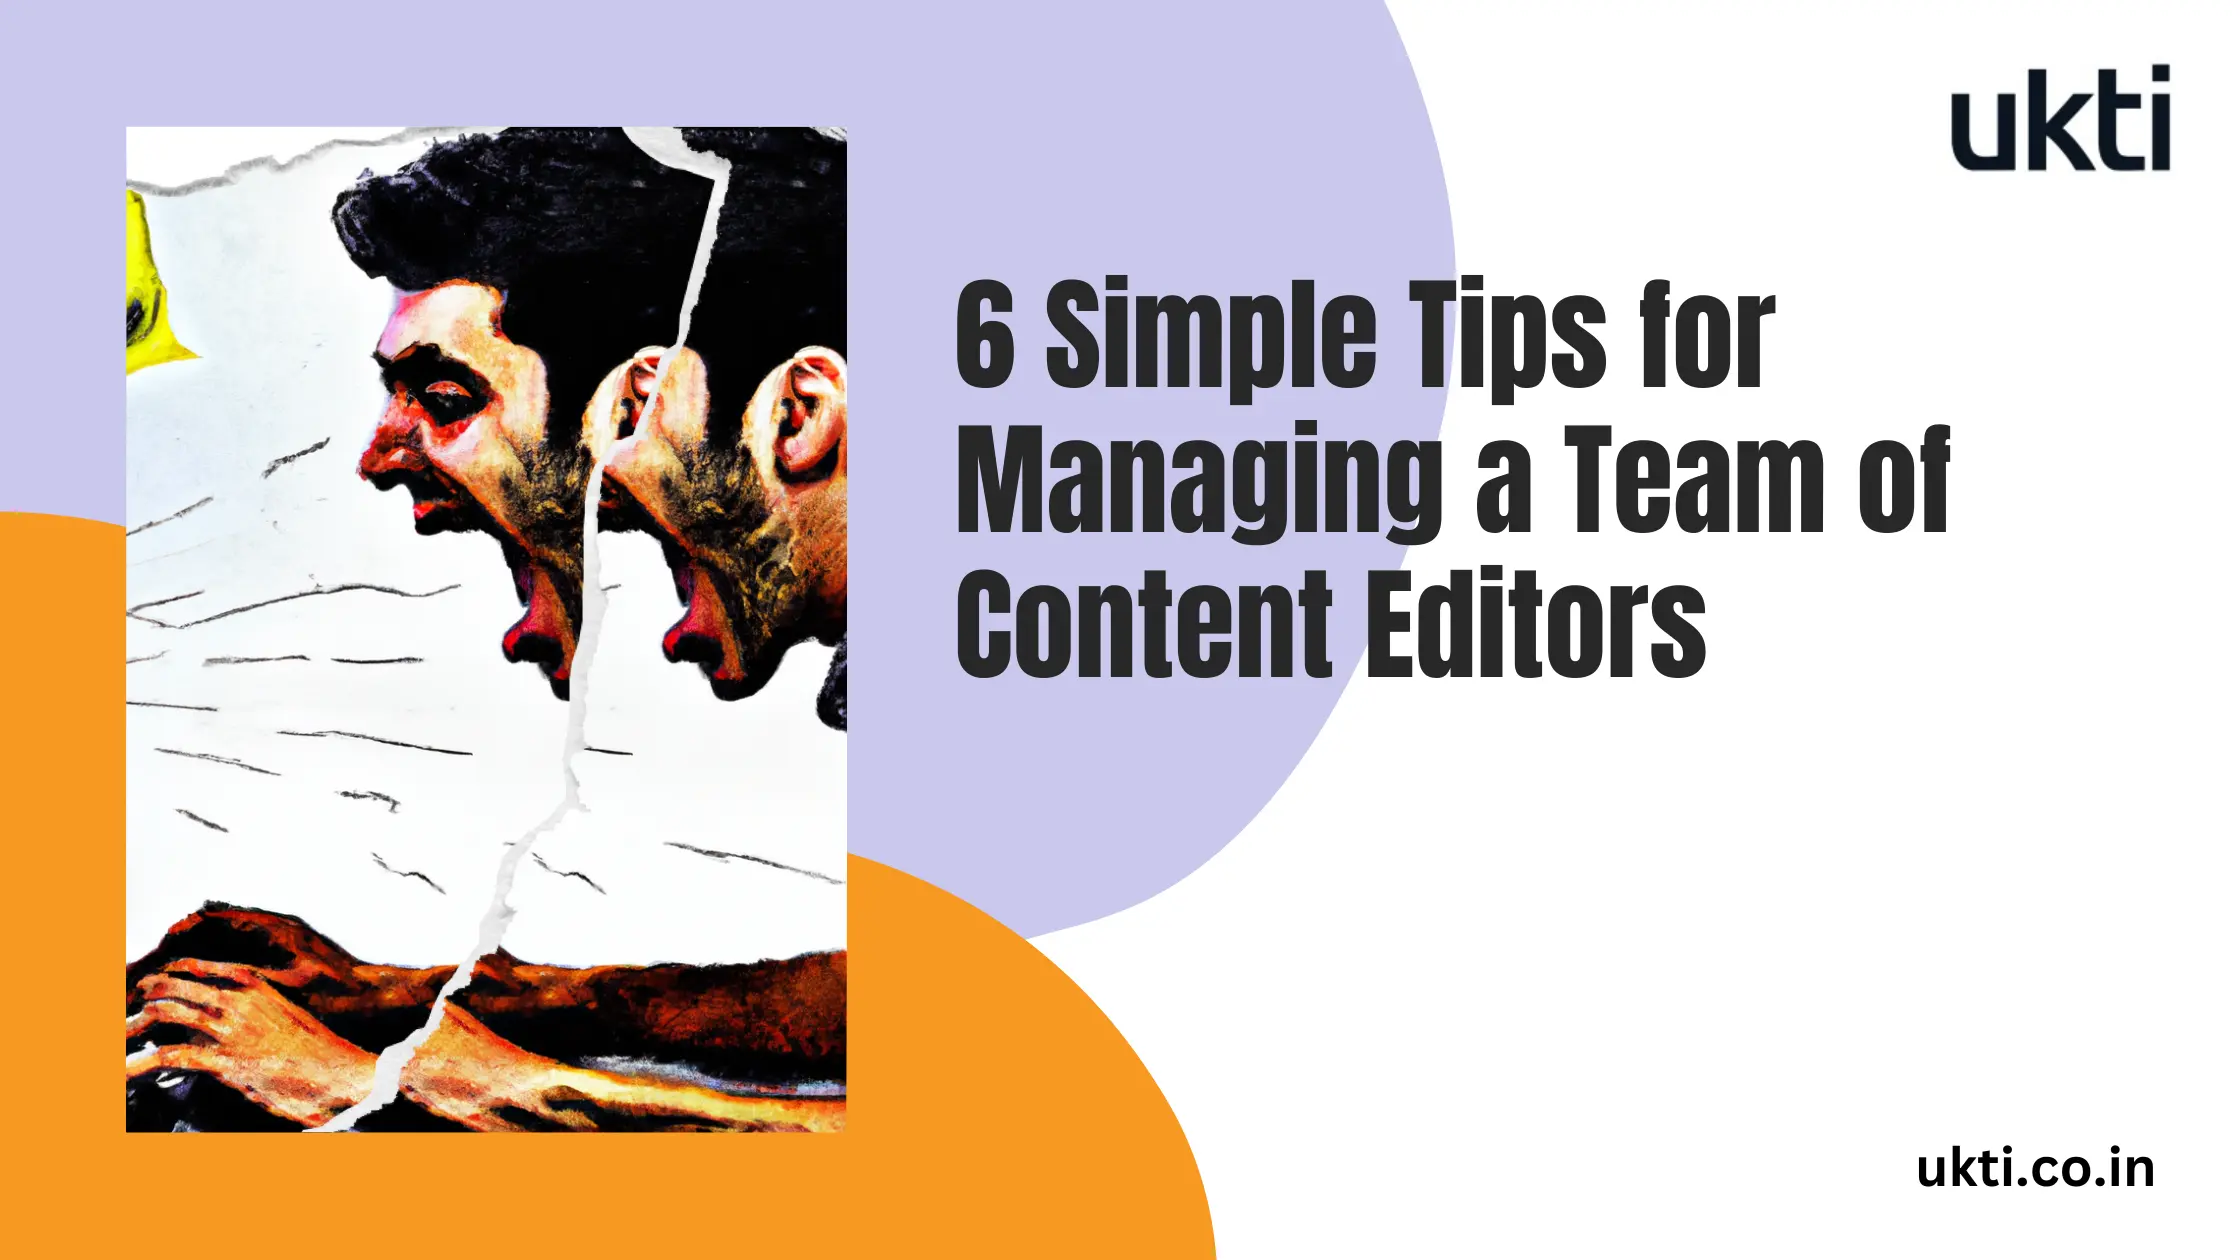 Tips for managing a team of content editors